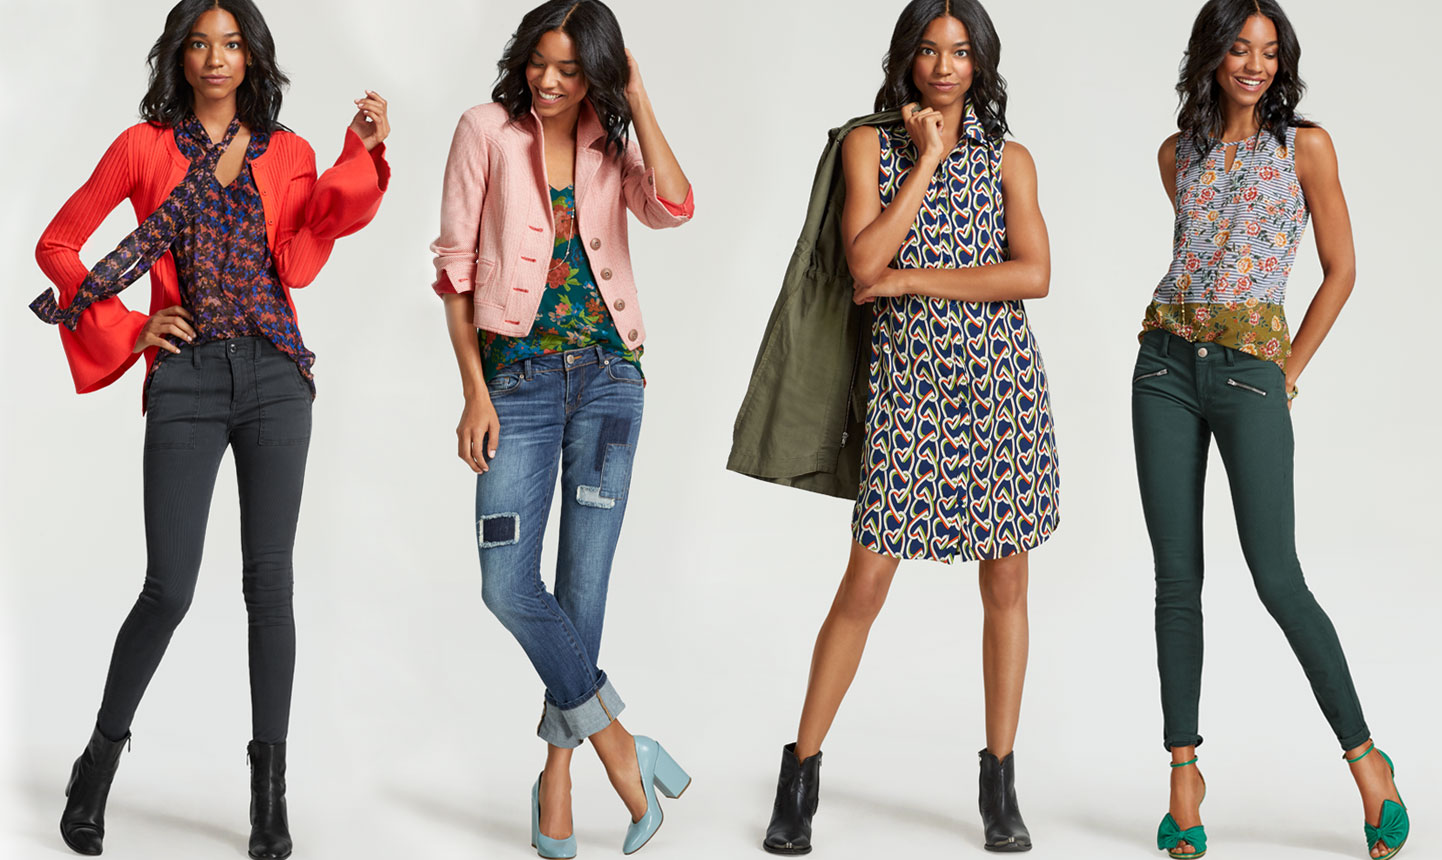 cabi Spring 2024 Clothing Campaign, cabi clothing